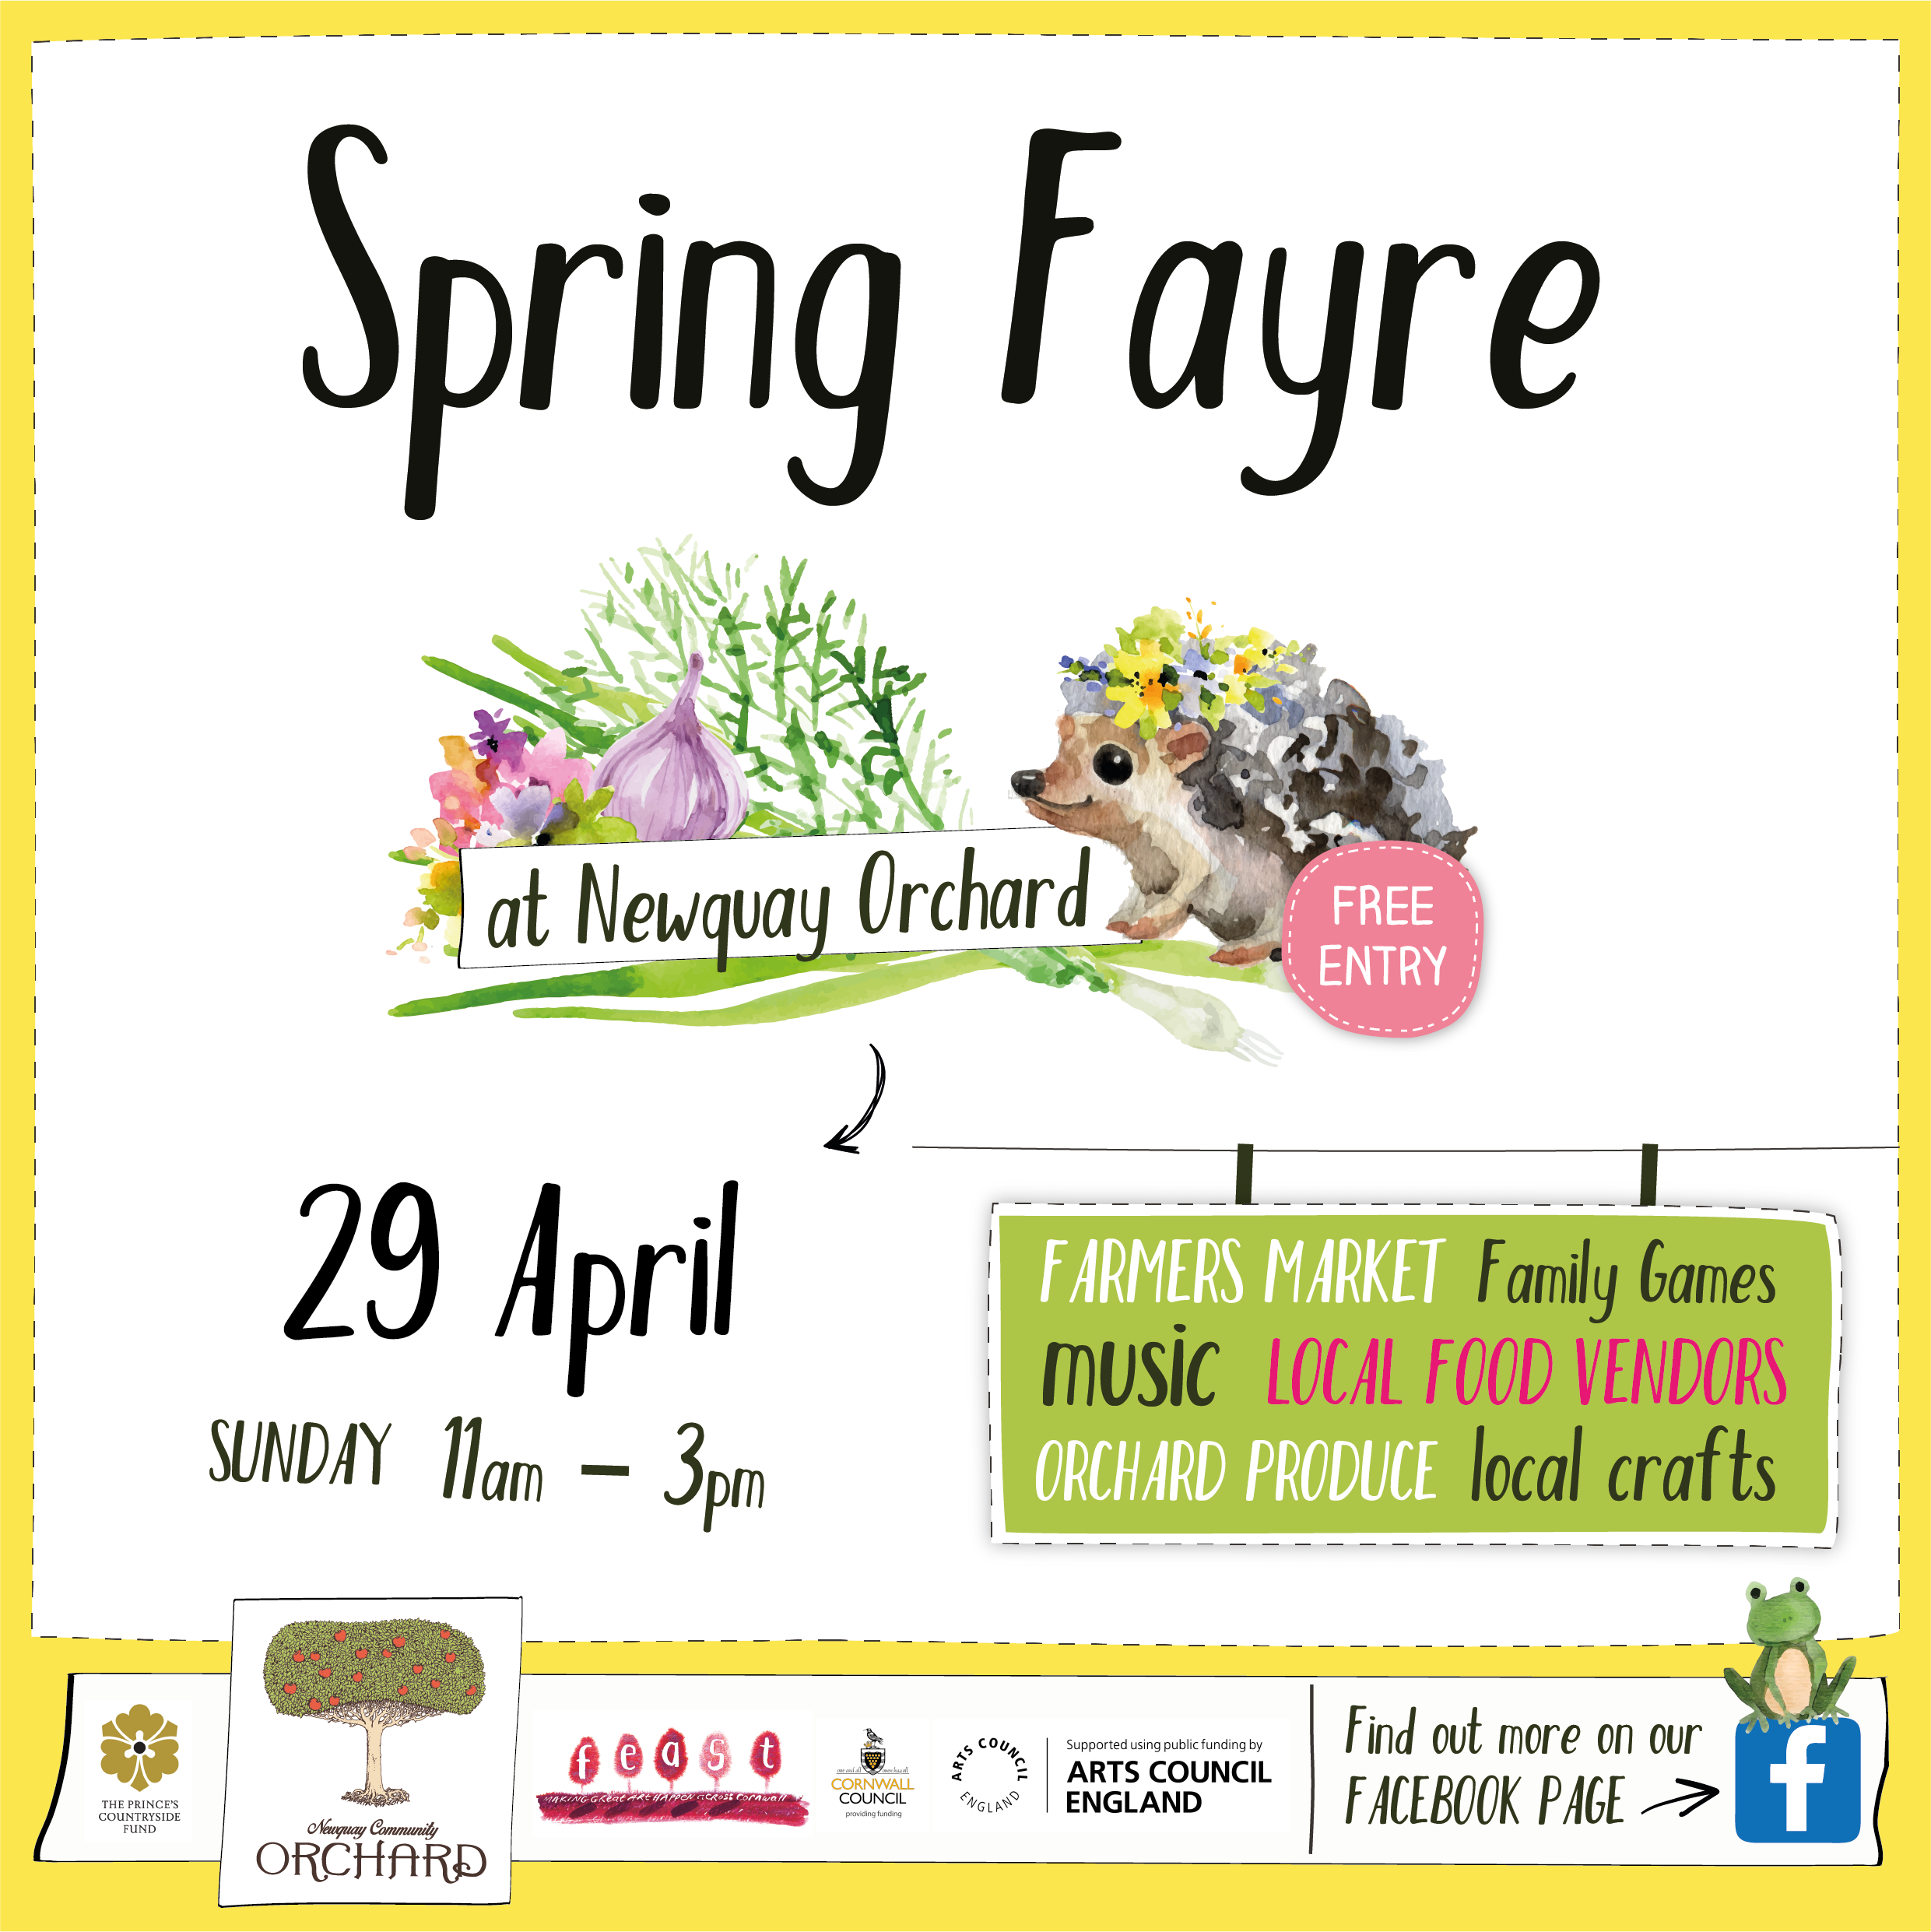 Join us for a celebration of all things spring at our Spring Fayre, on Sunday 29th April, 11am - 3pm. There will be a farmers market, craft stalls, yoga, talks, games and live music. Bring all the family, do your week's shop or just hang out and have a picnic.